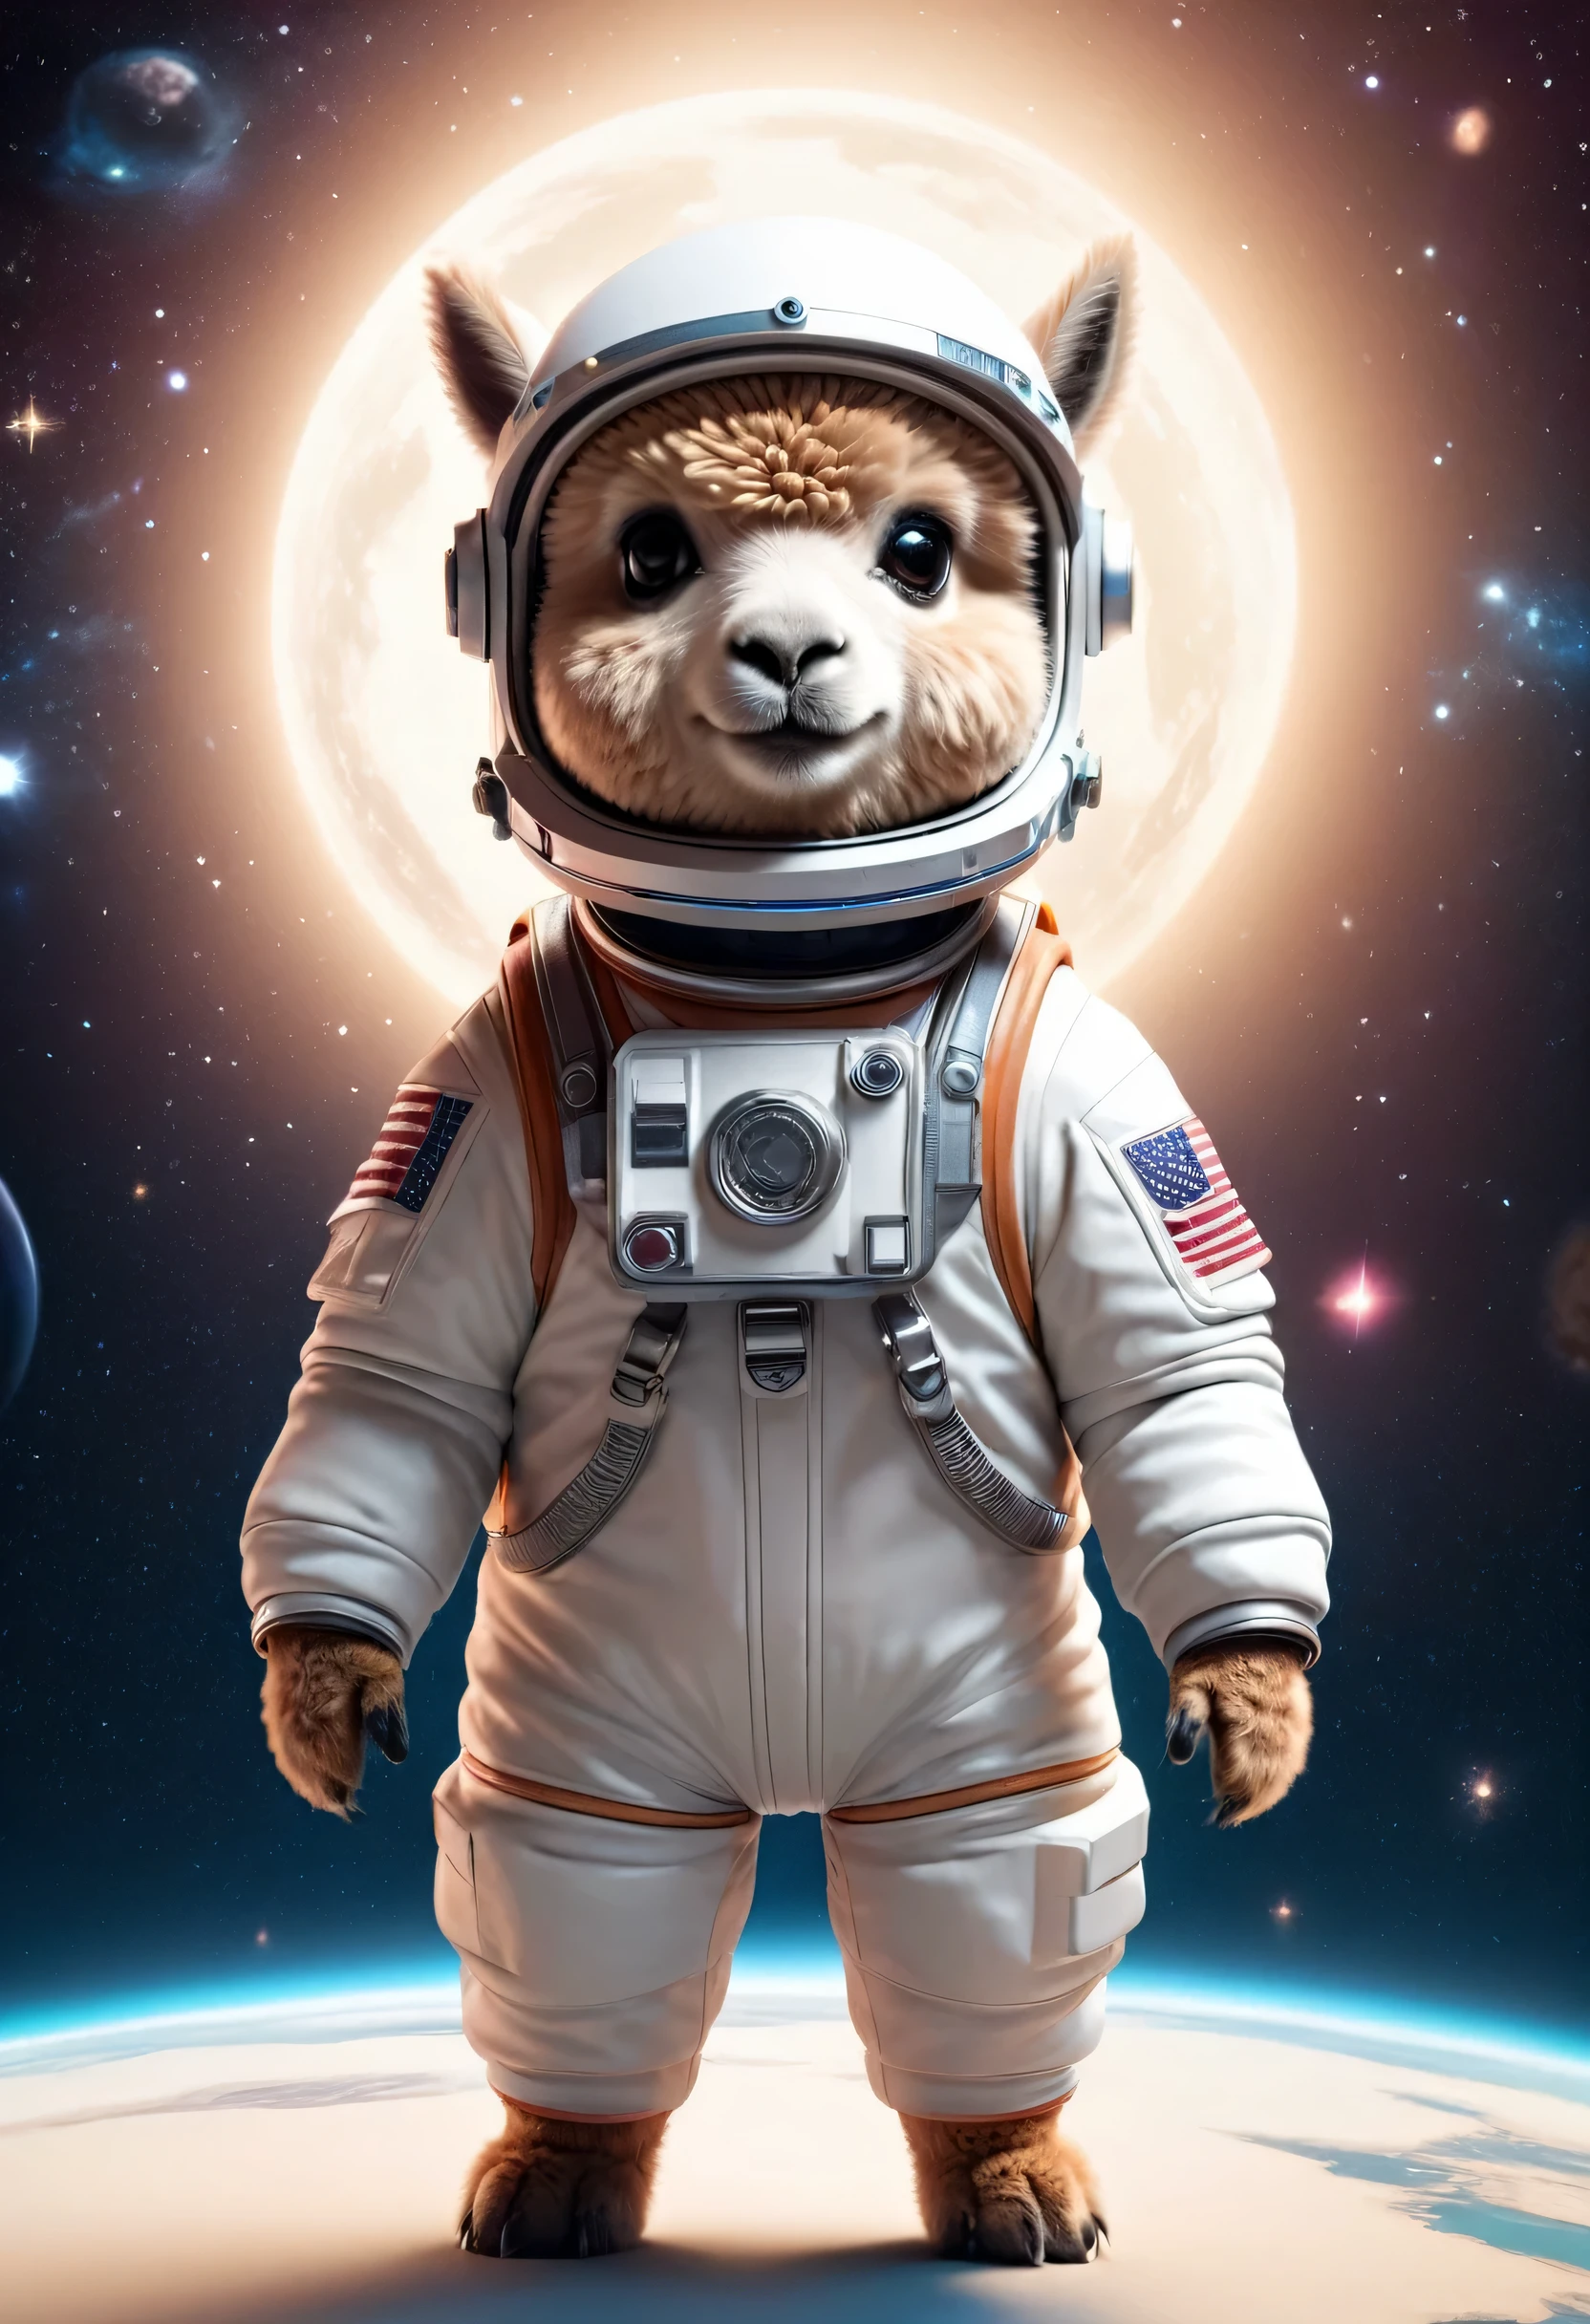 masterpiece, chibi, cute, CGI, full body, 3D renders, surrealism, an alpaca wearing astronaut helmet, floating in space, planetary background, ray tracing, global illumination, studio lighting, epic composition, epic proportion, HD